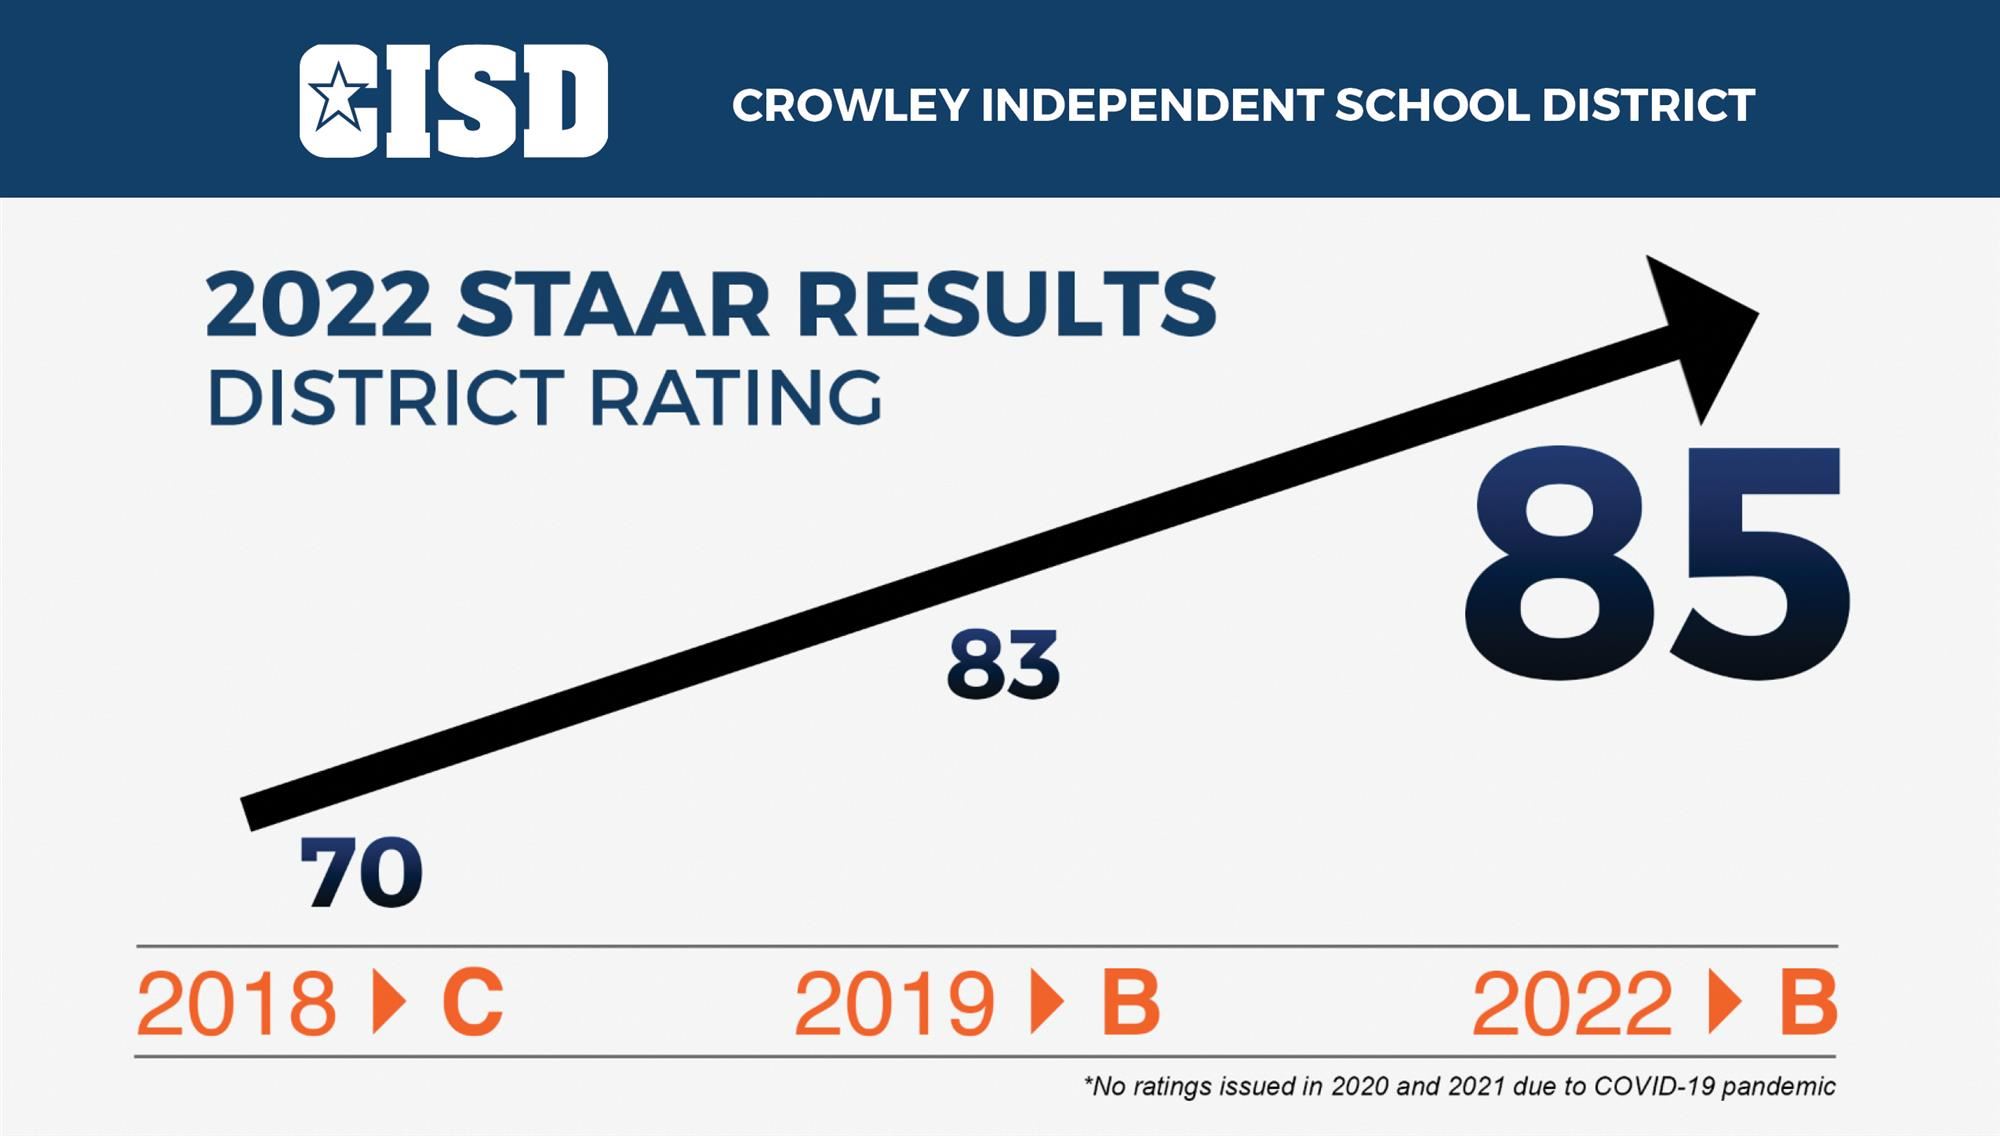 District STAAR Rating increases to 85